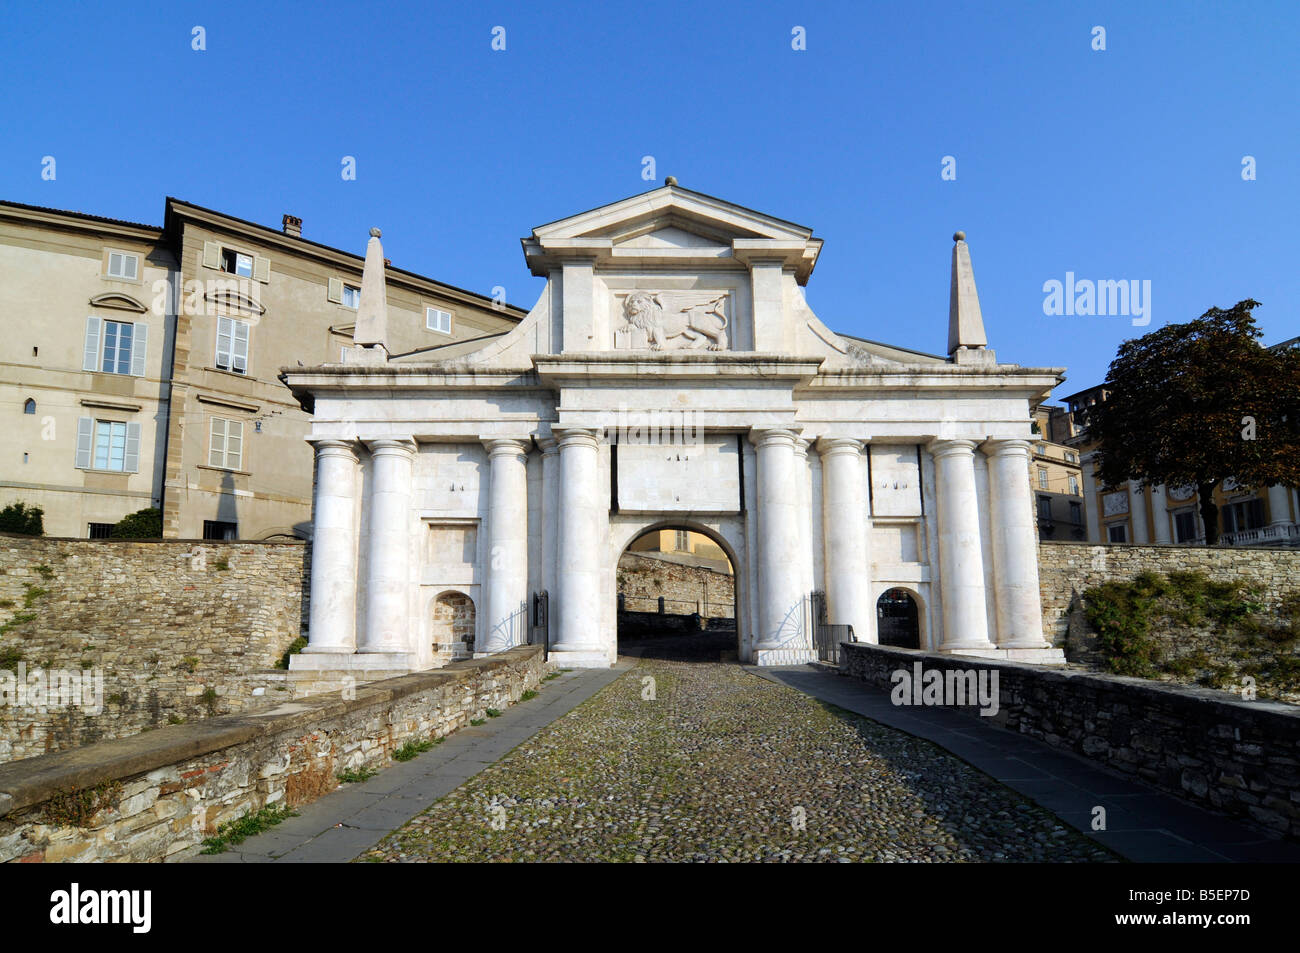 The main gate leading to the old town of Bergamo, in northern Italy. Stock Photo